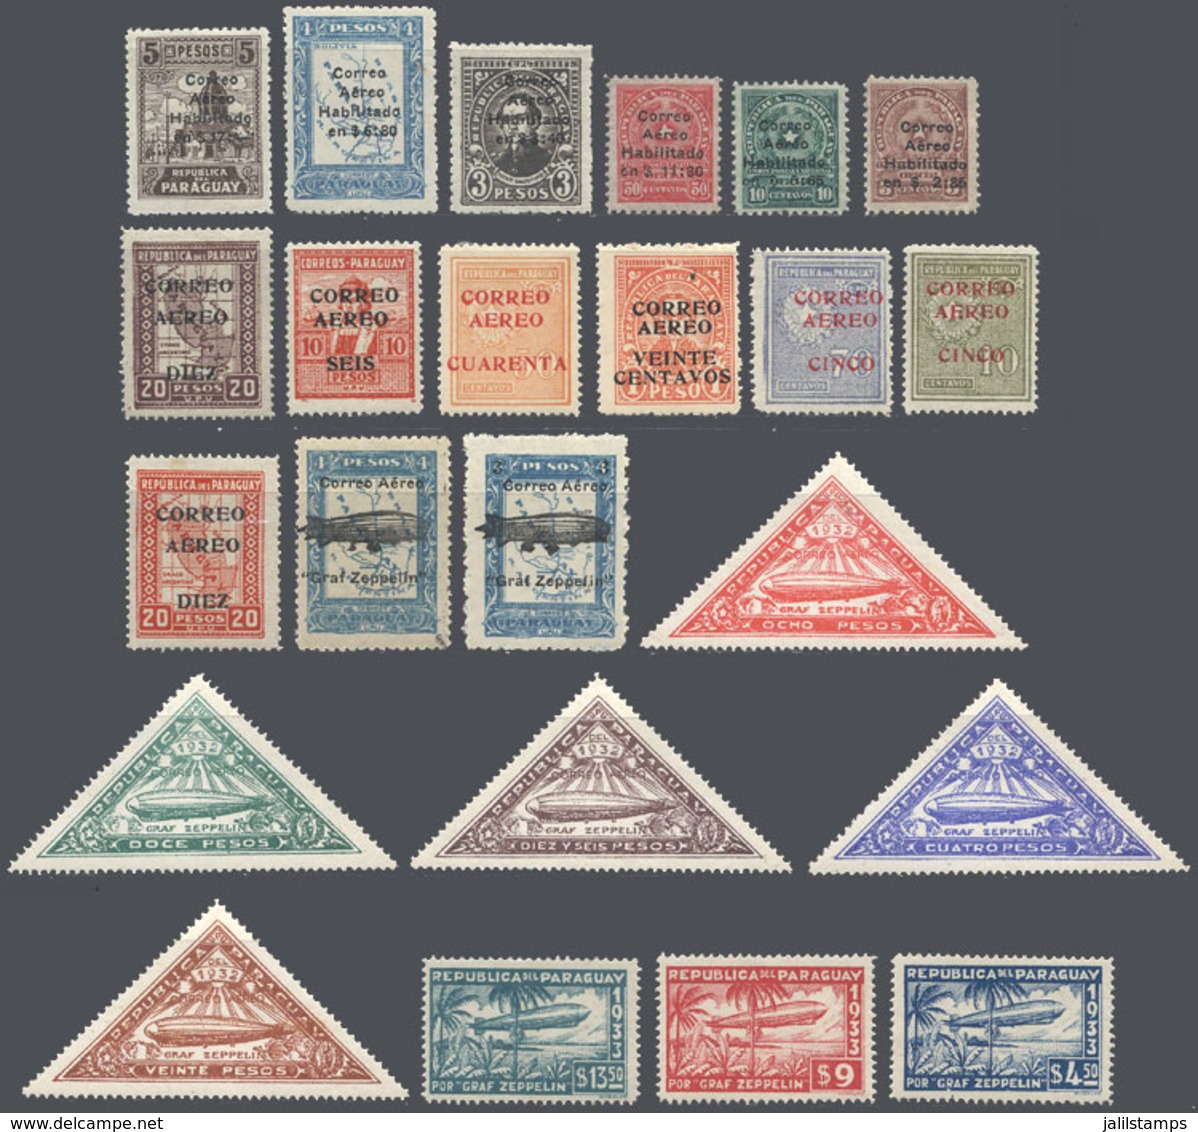 PARAGUAY: Complete Sets Issued Between 1929 And 1940, Some Stamps Are MNH, The Rest Mint Lightly Hinged, And All Of VF Q - Paraguay